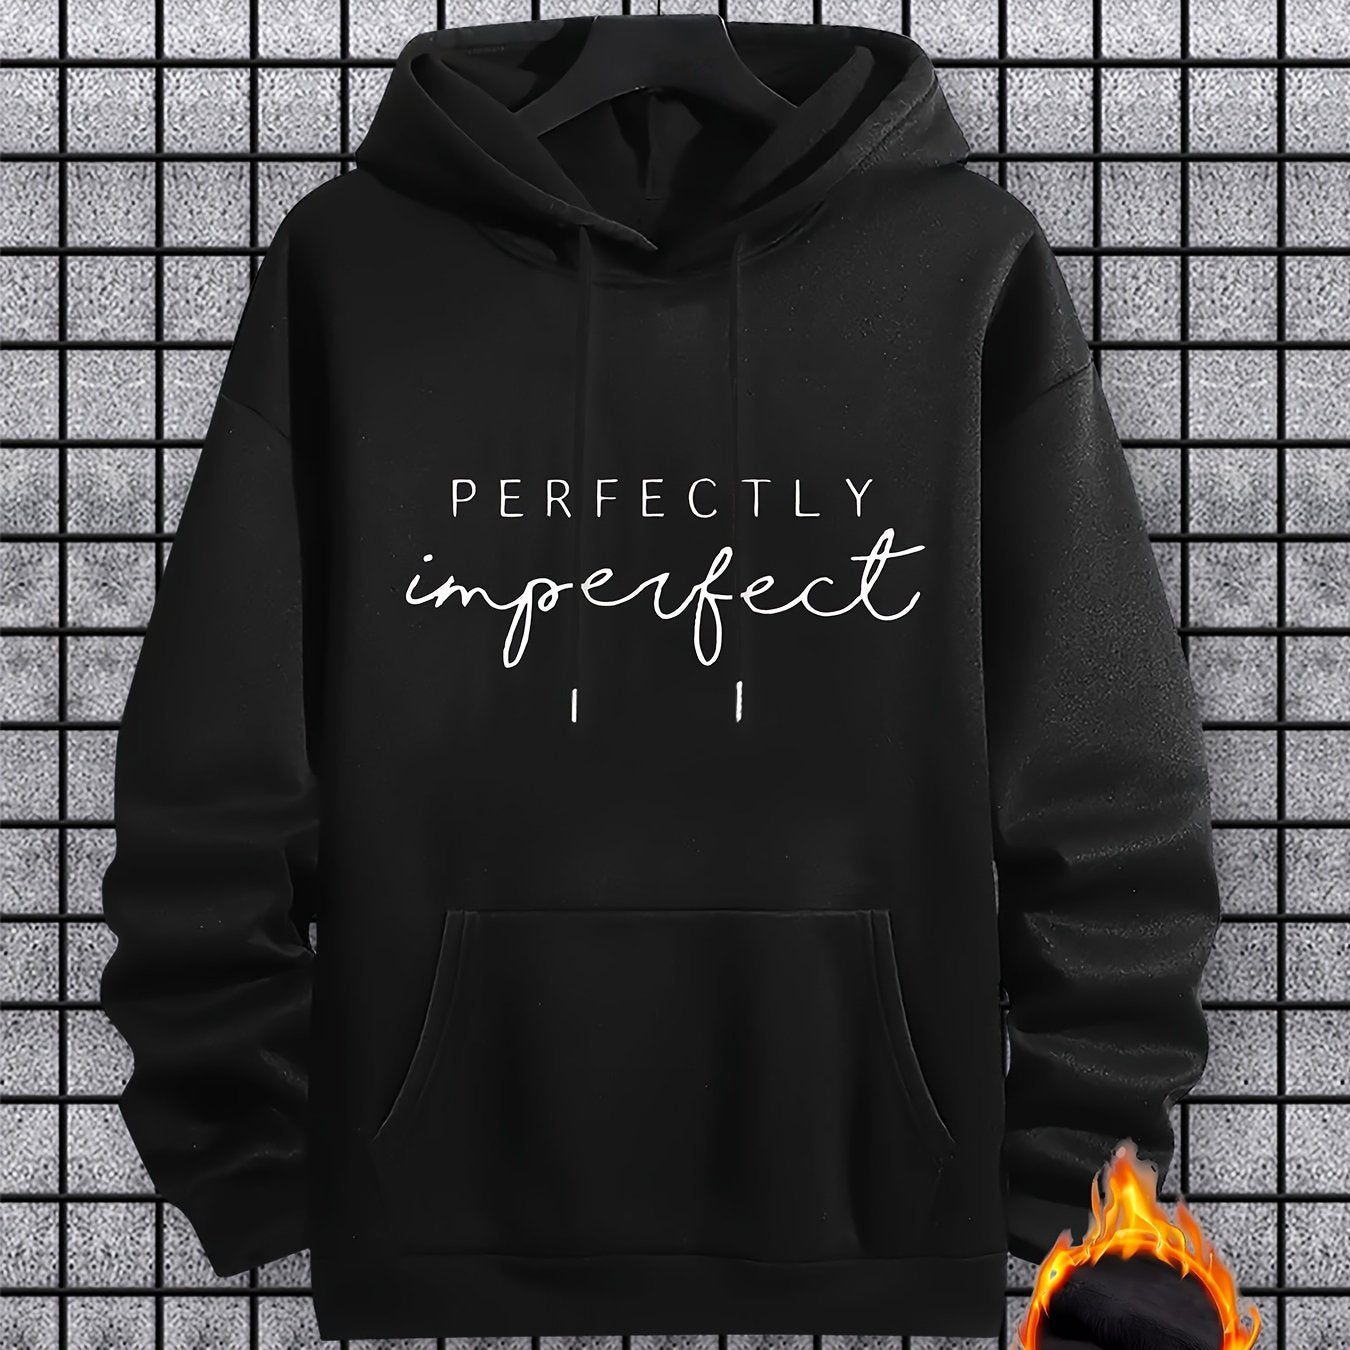 Perfectly Imperfect Men's Christian Pullover Hooded Sweatshirt claimedbygoddesigns